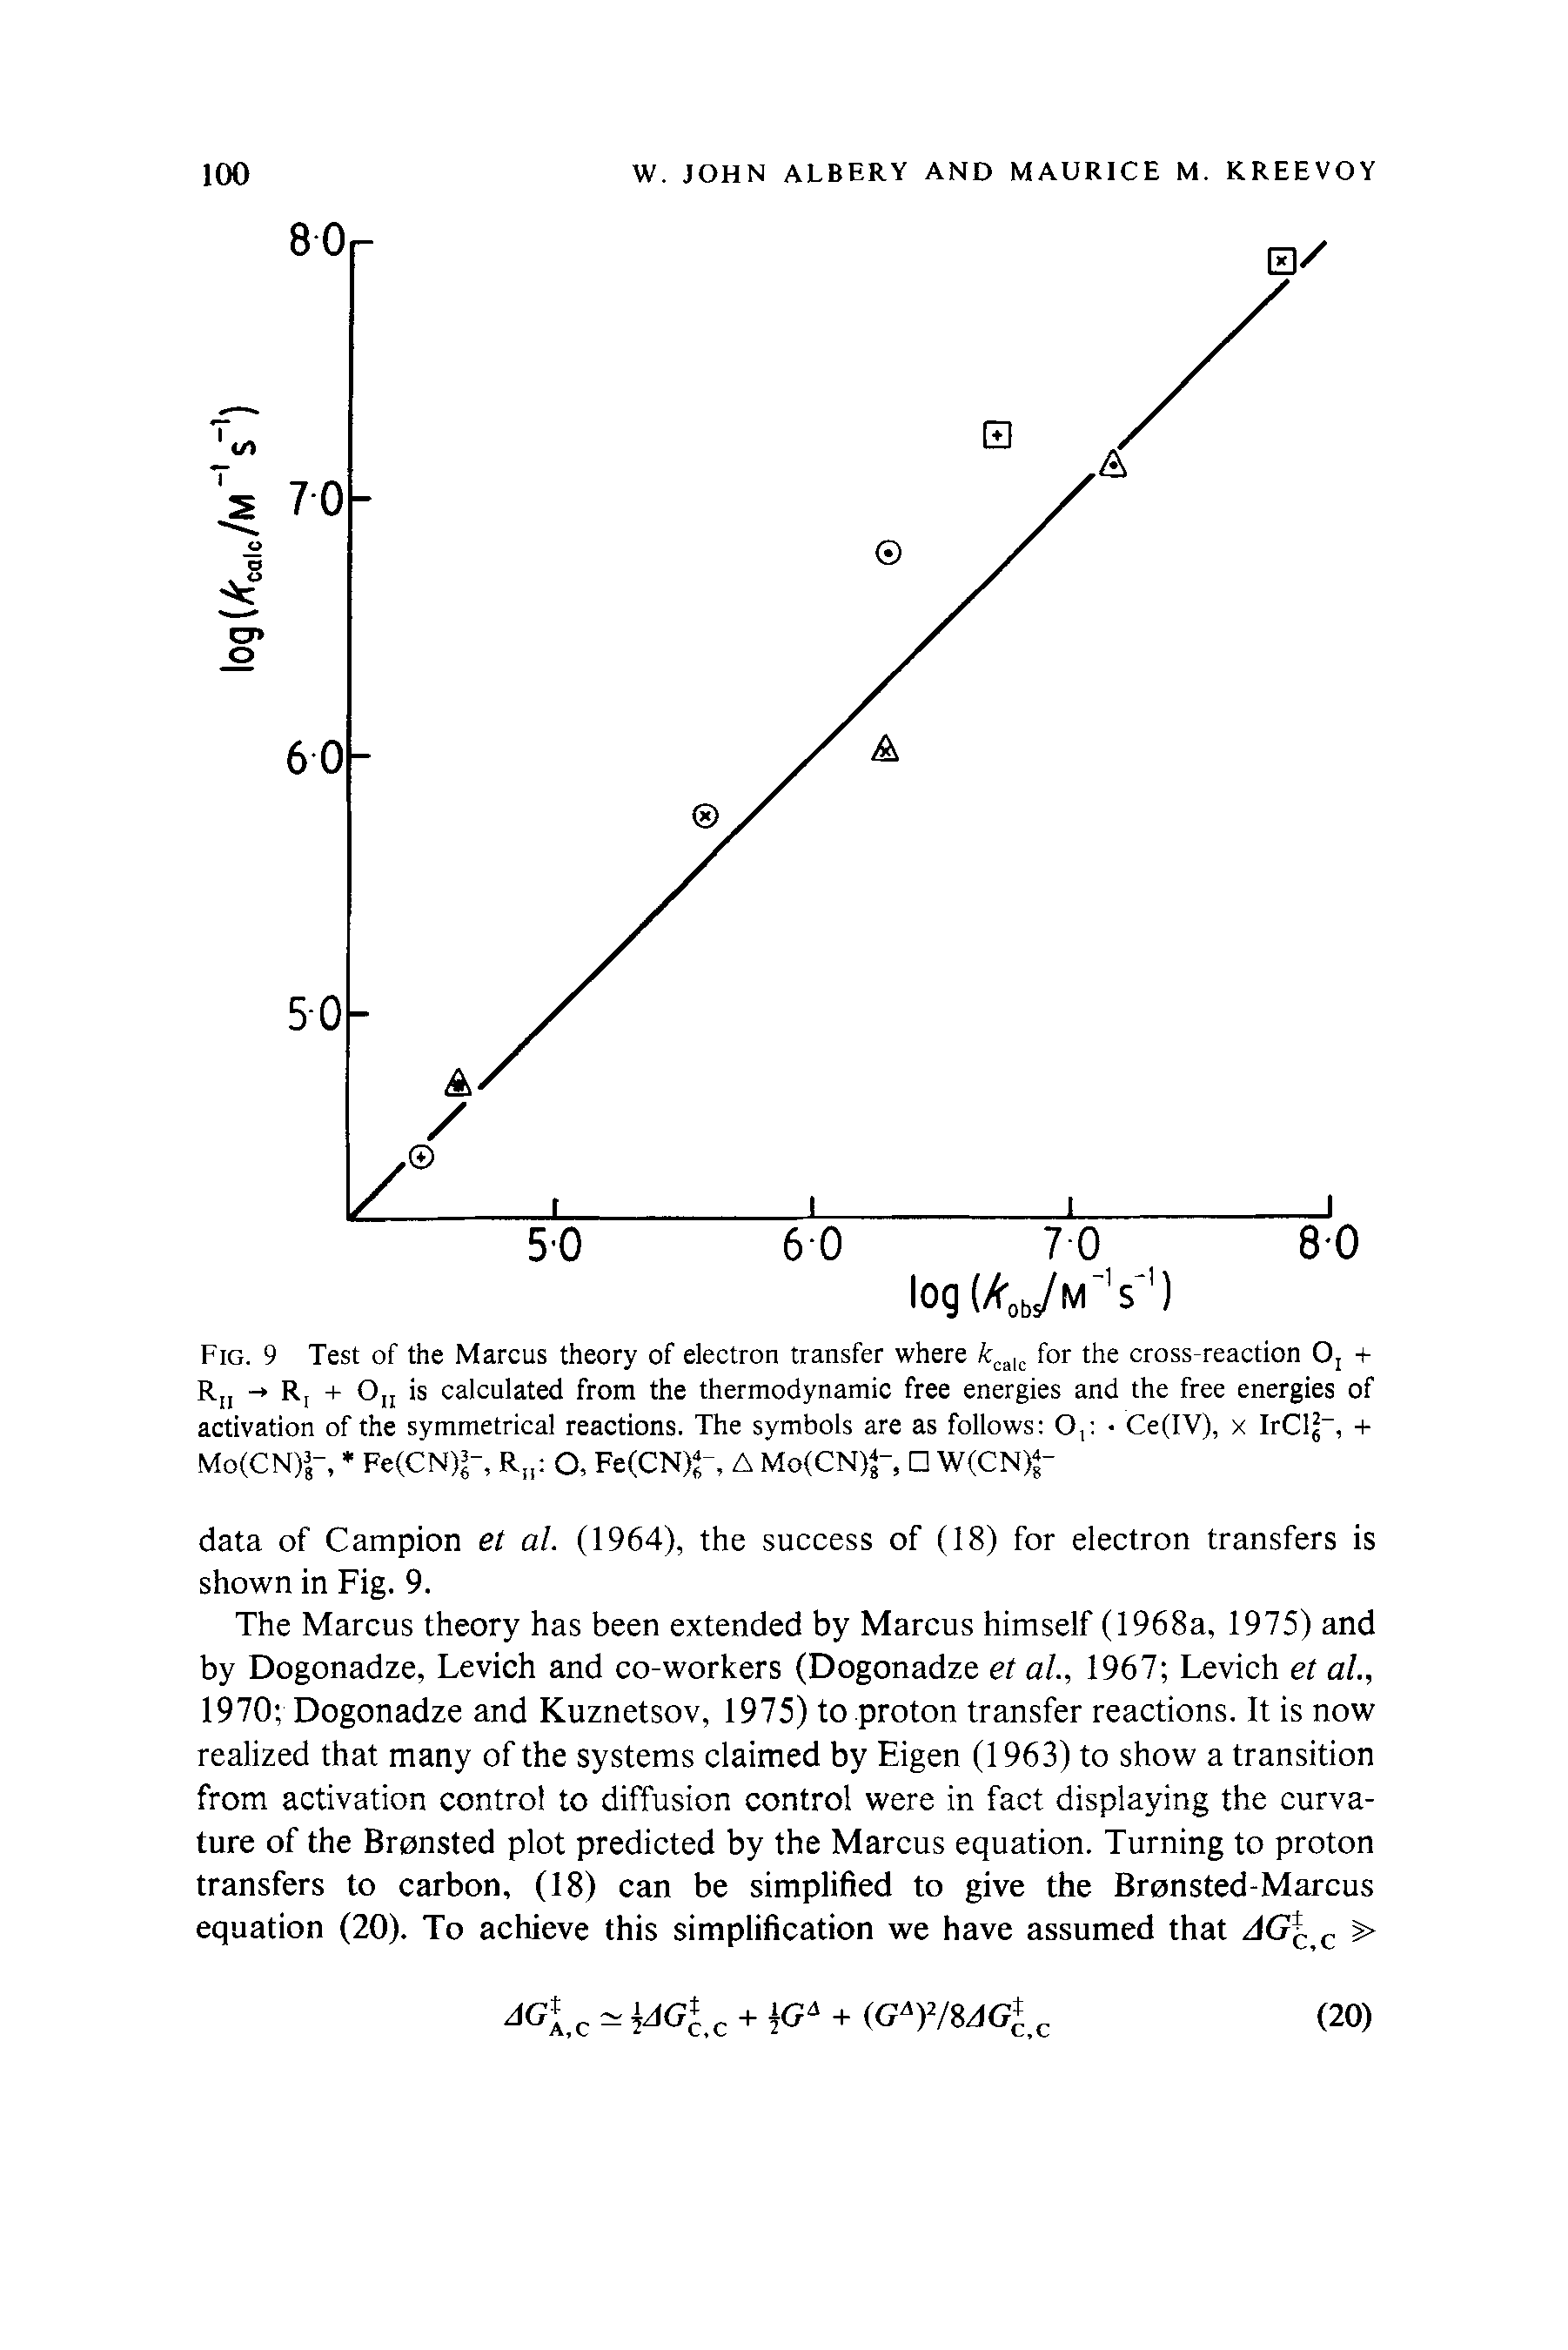 Fig. 9 Test of the Marcus theory of electron transfer where fcca,c for the cross-reaction O, + R - R, + On is calculated from the thermodynamic free energies and the free energies of activation of the symmetrical reactions. The symbols are as follows O, Ce(IV), x IrCl -, + Mo(CN)j-, Fe(CN) ", R O, Fe(CN)J , A Mo(CN)f, W(CN)<-...